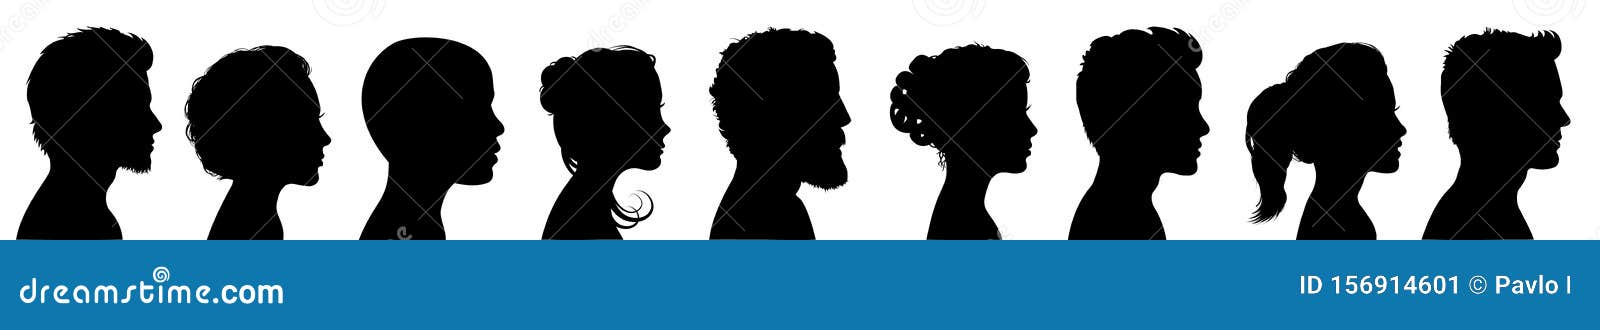 group young people. profile silhouette faces boys and girls set Ã¢â¬â for stock